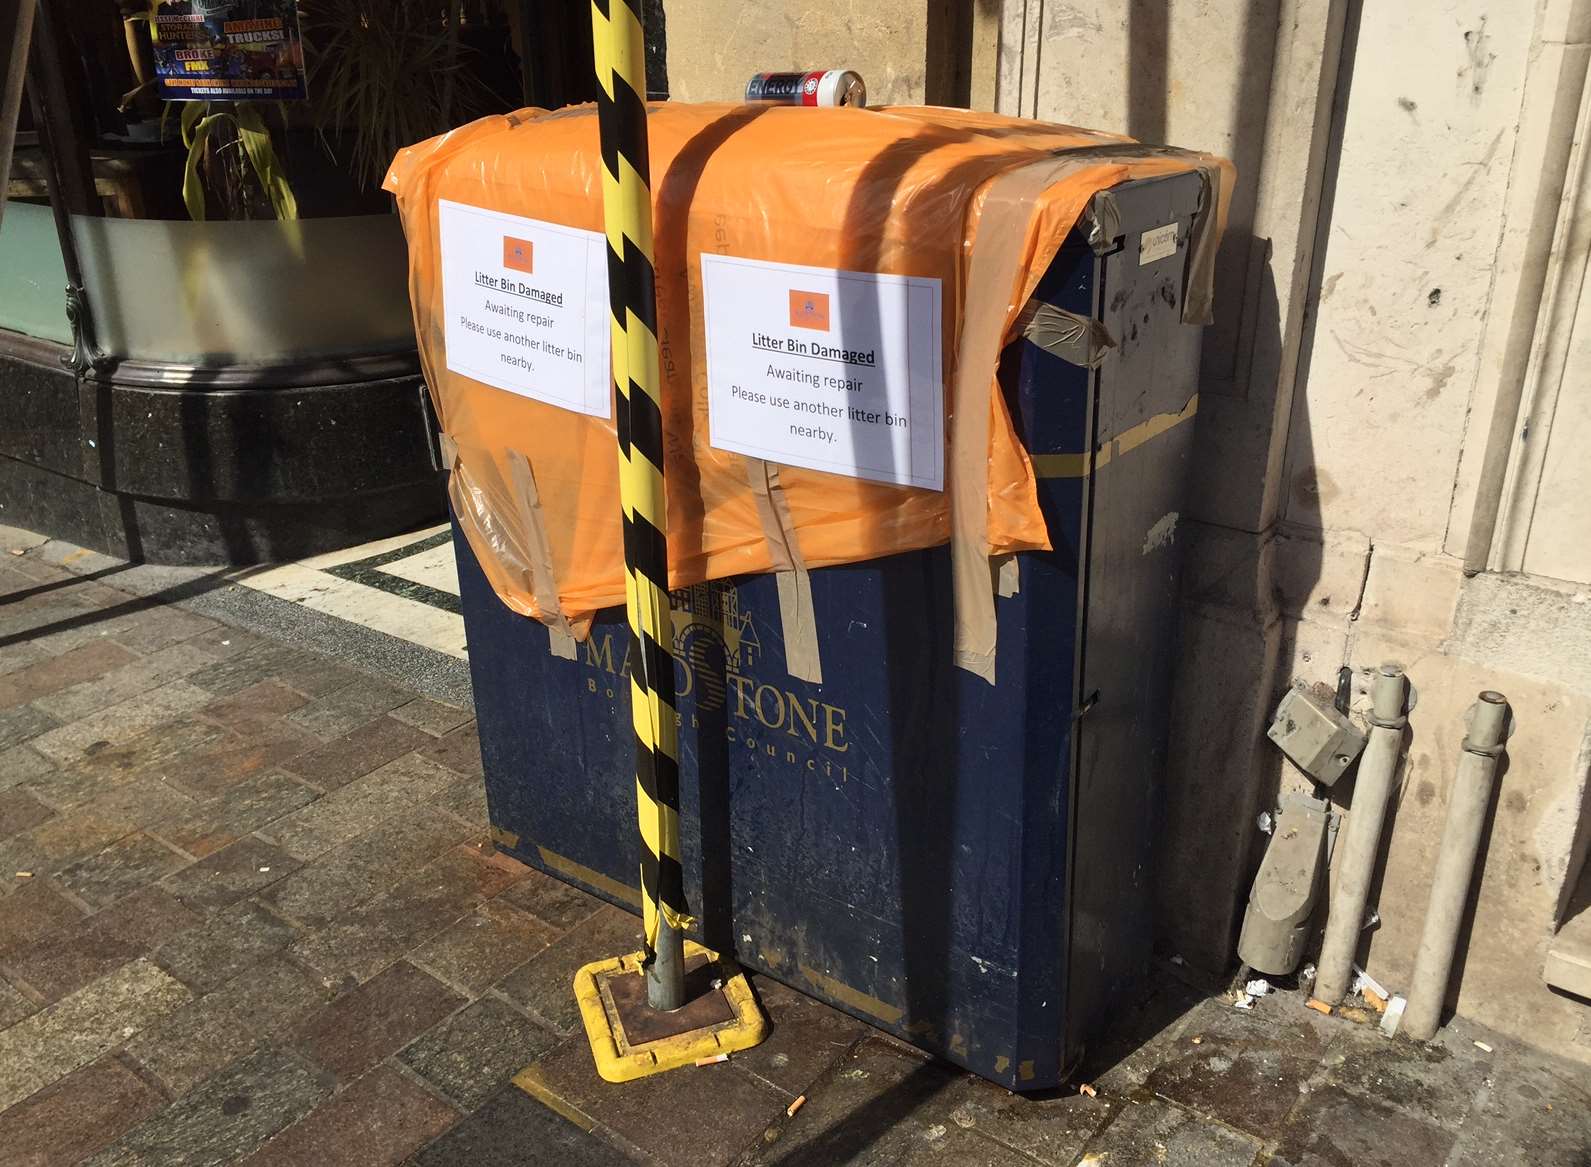 The bin was taped off after because scaffolding prevents workers from emptying it